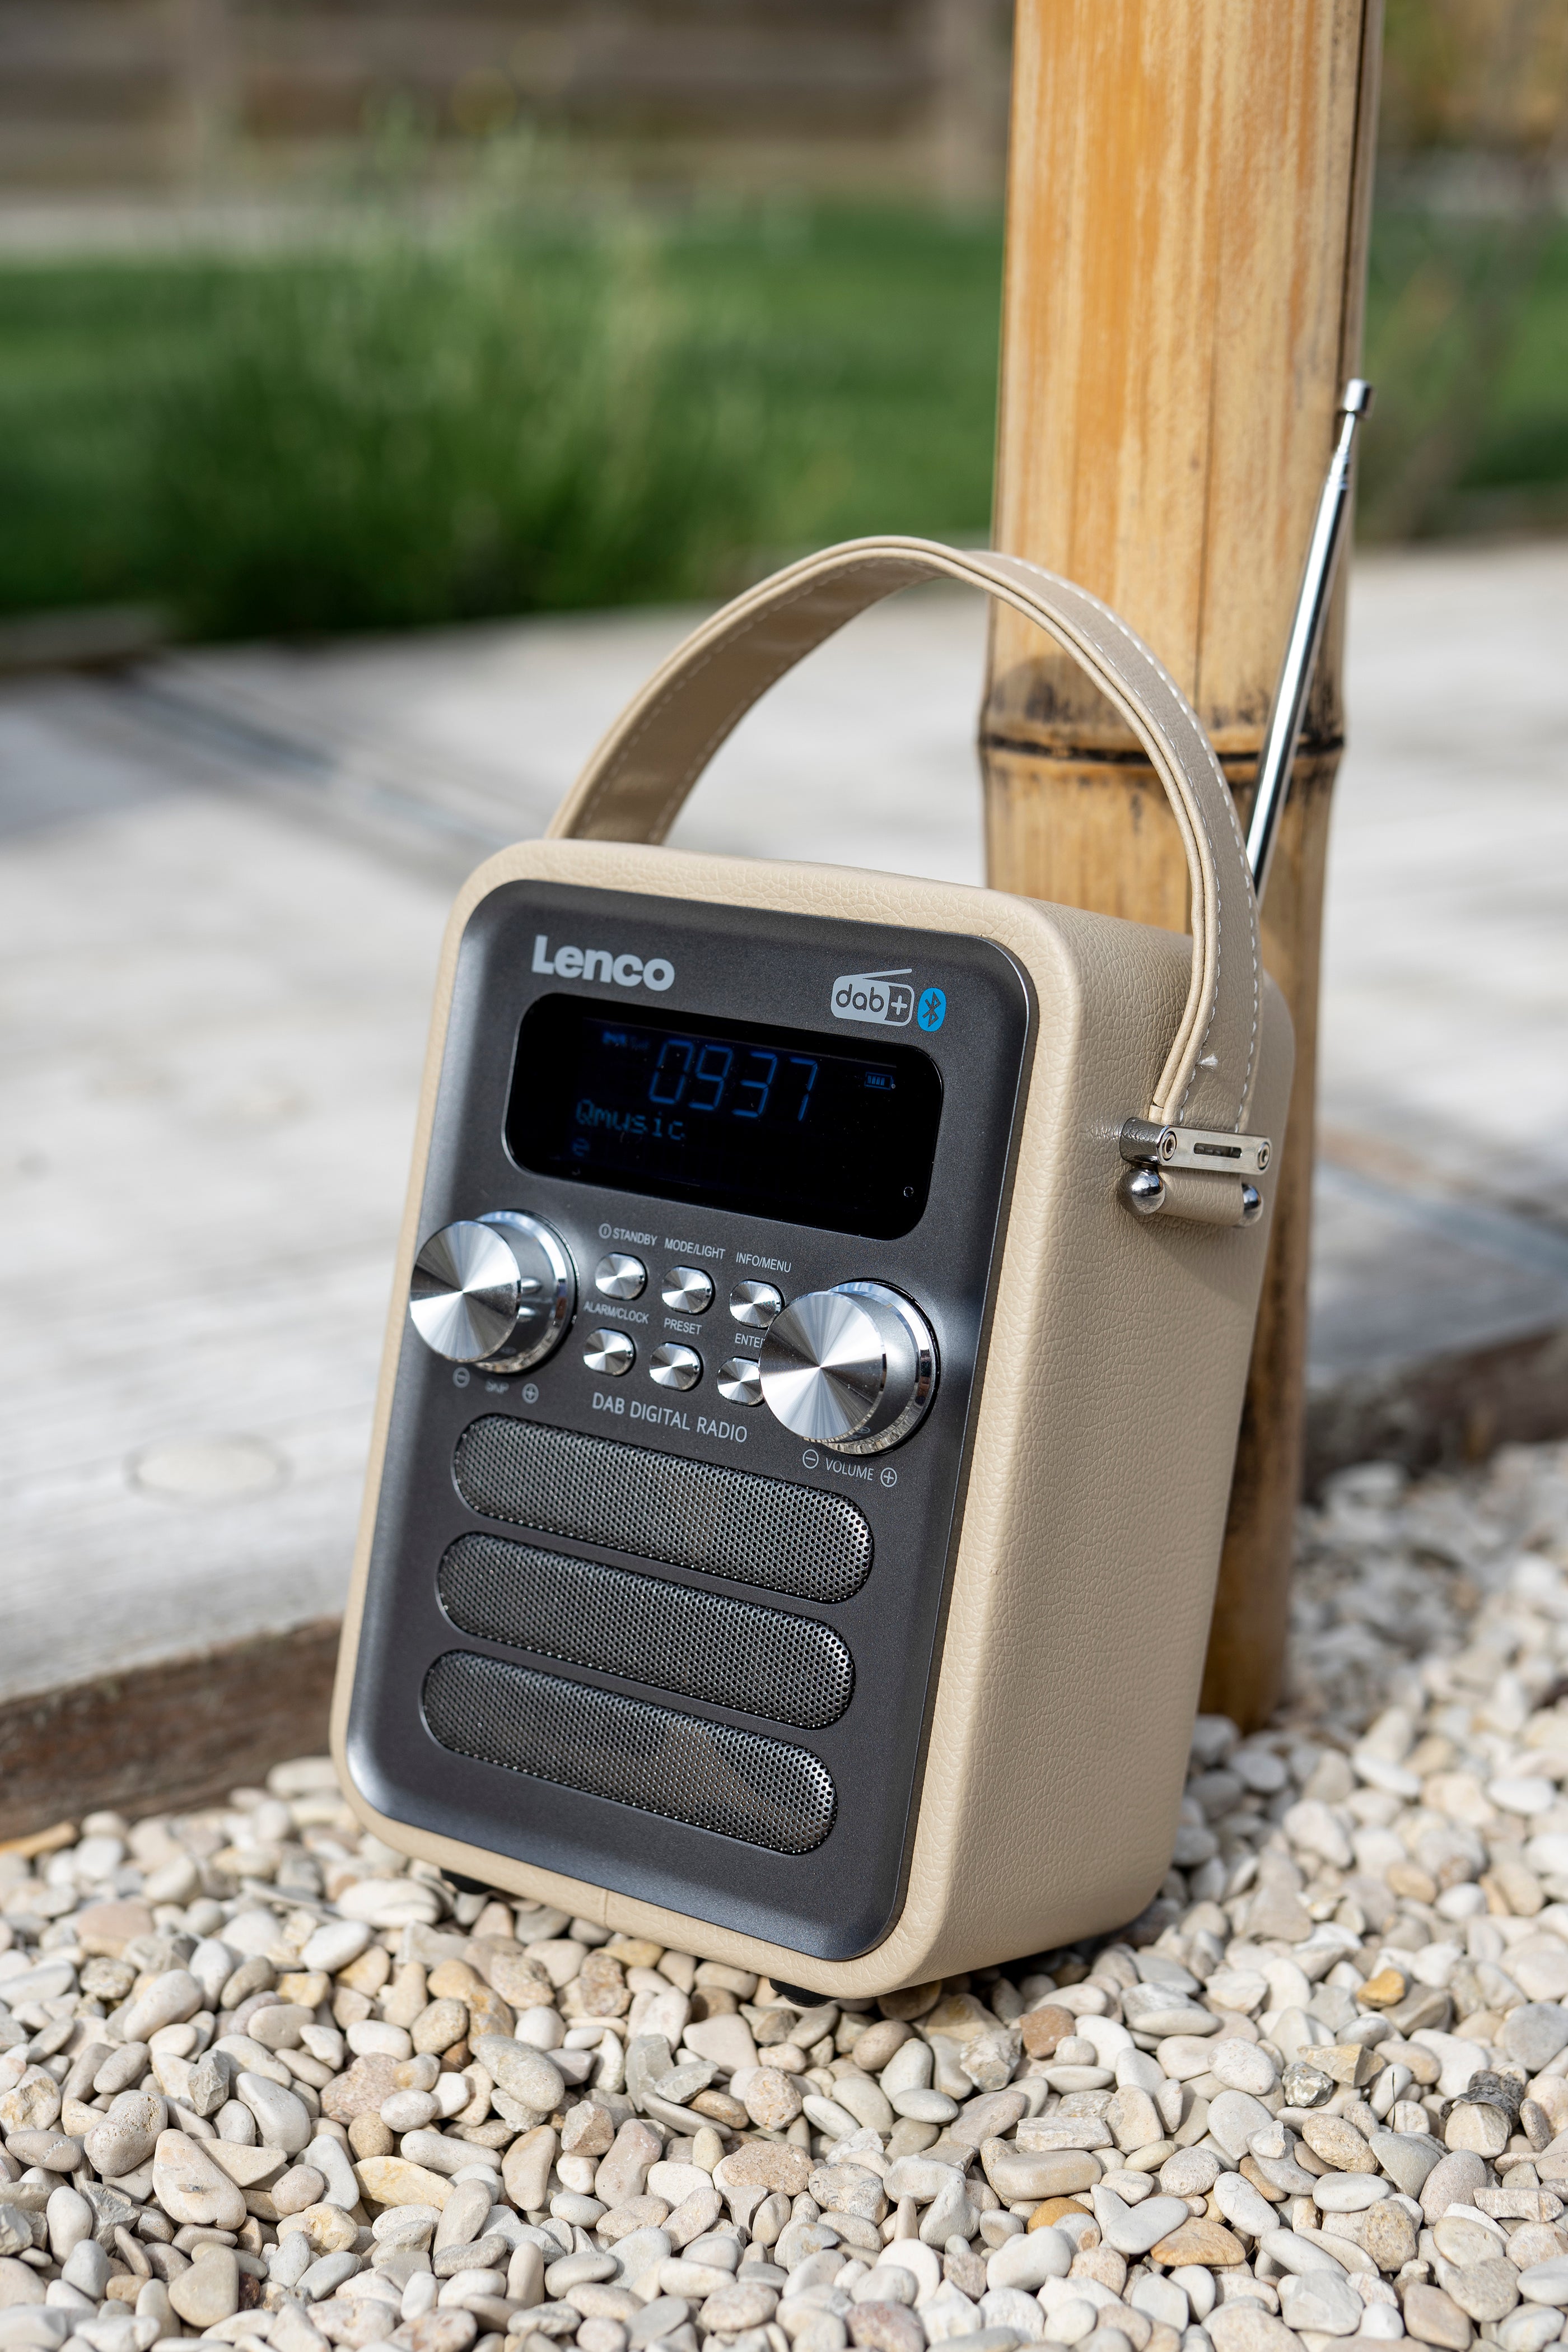 Radios from Lenco! official Now in shop the